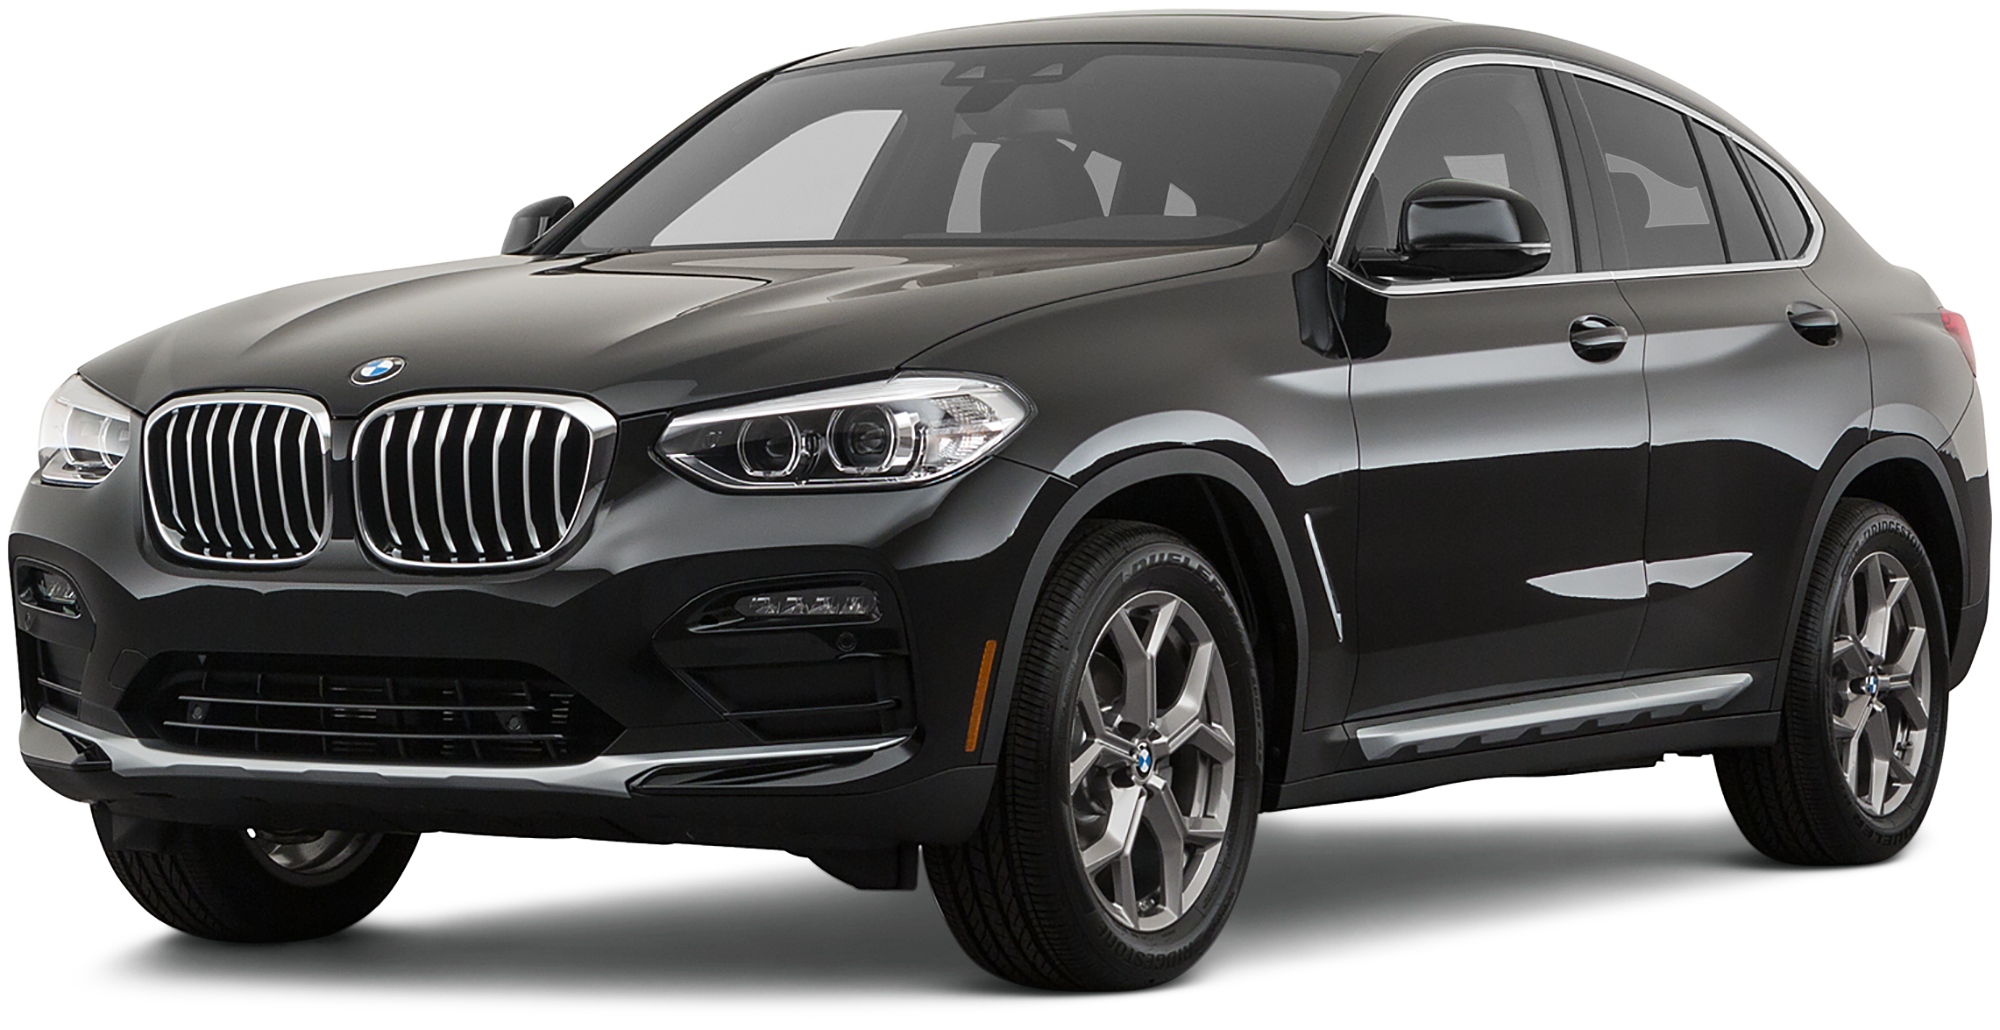 2020 BMW X4 Incentives, Specials & Offers in Chico CA